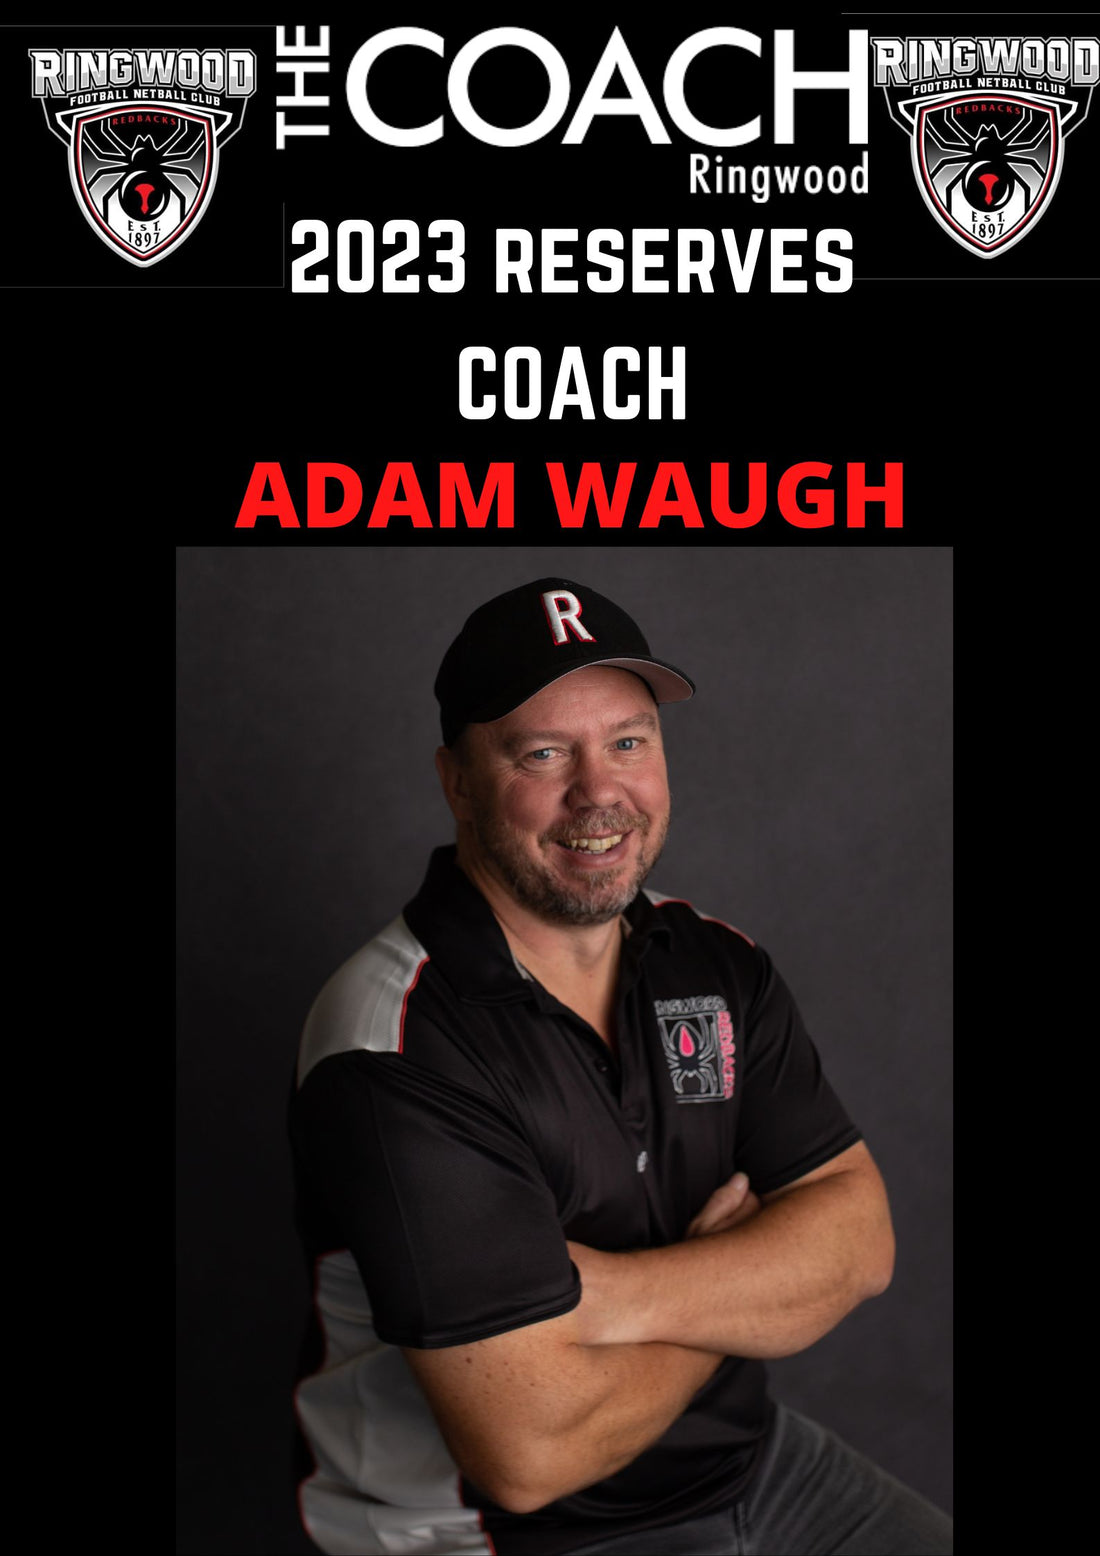 Adam Waugh to coach the reserves in 2023!